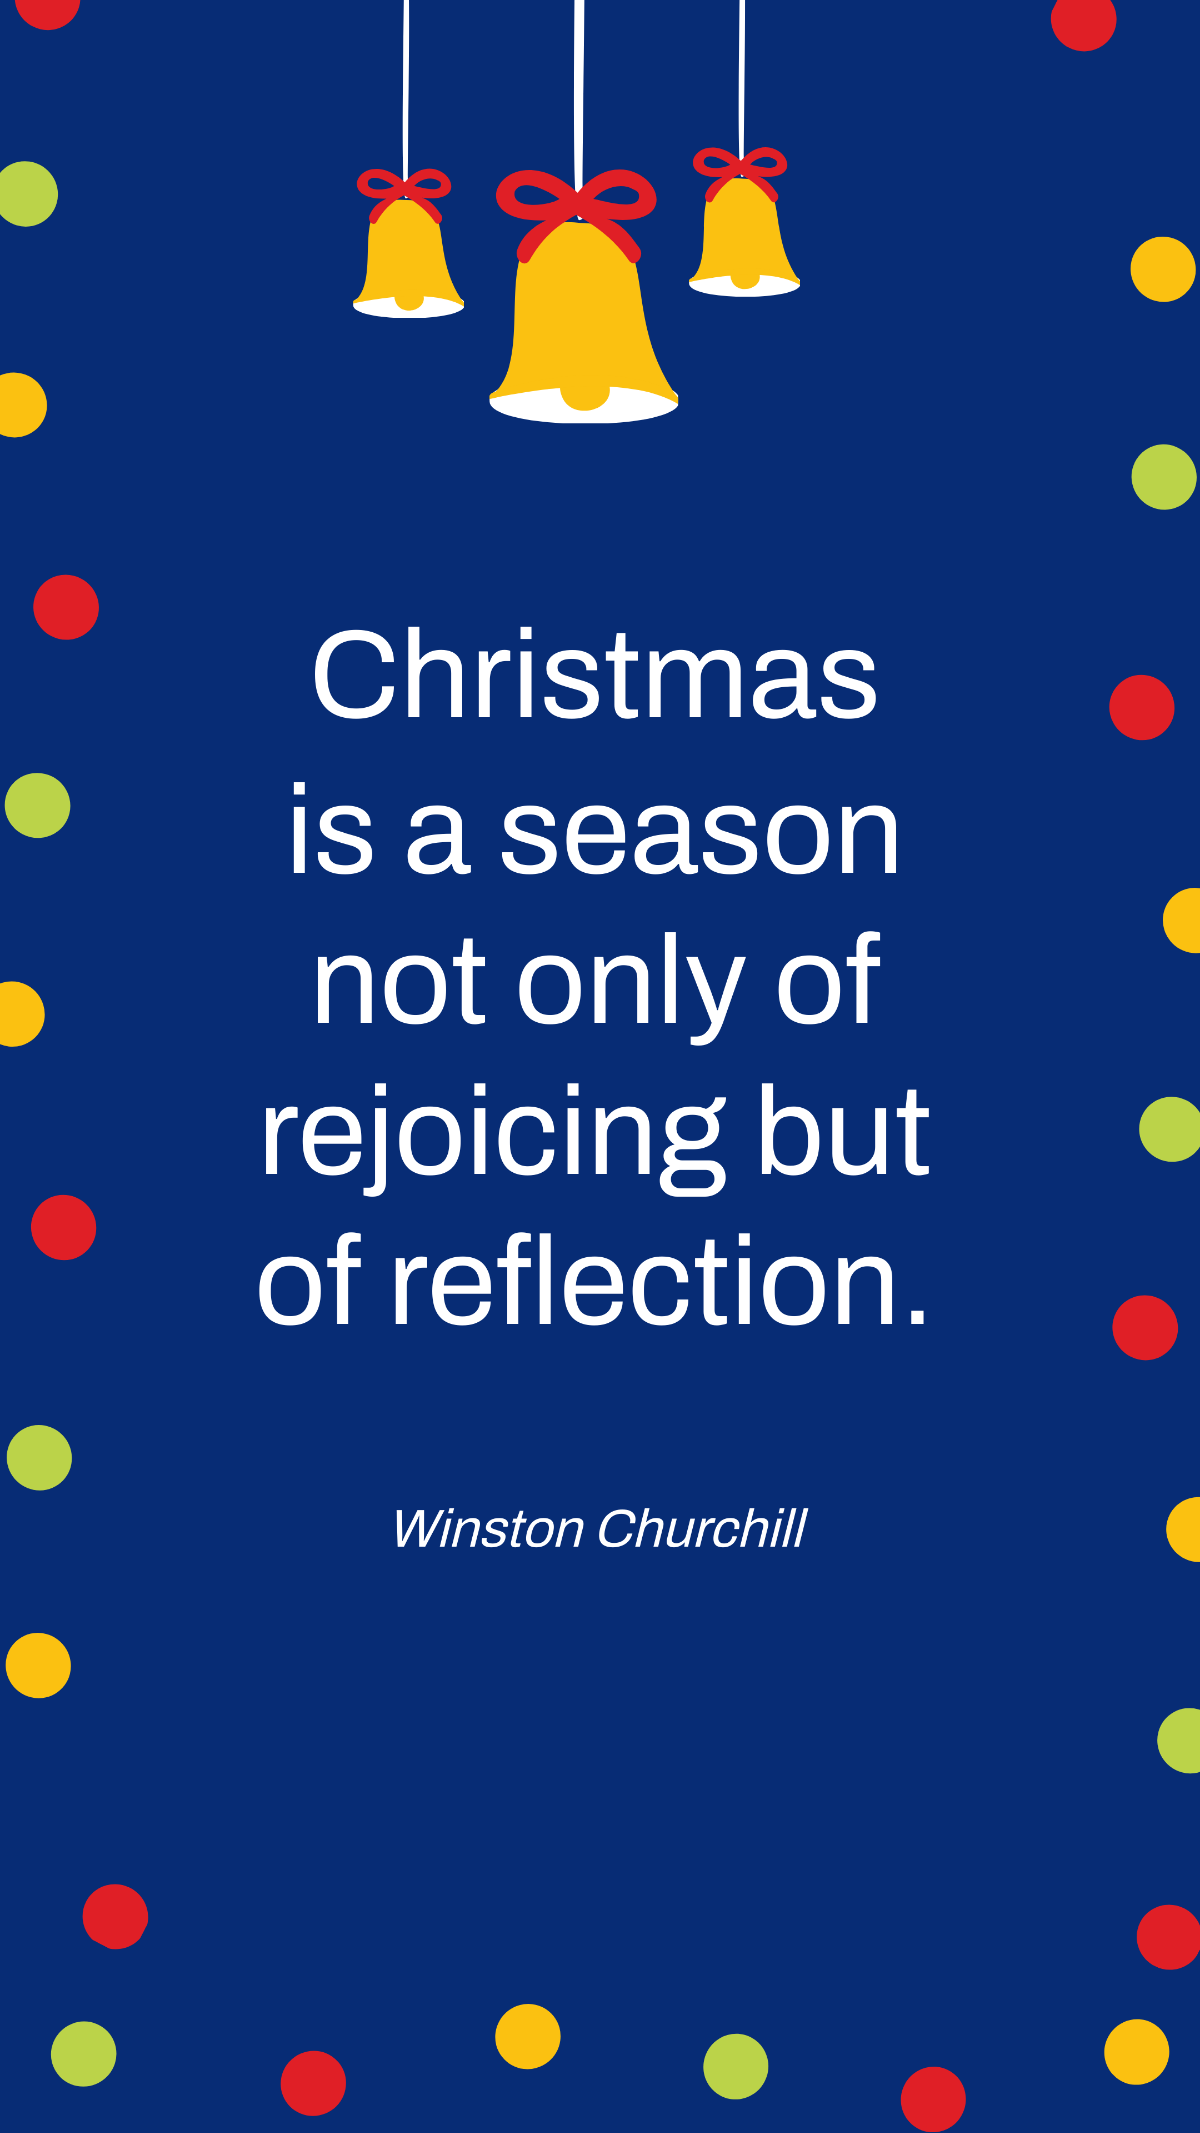 Winston Churchill - Christmas is a season not only of rejoicing but of reflection. Template